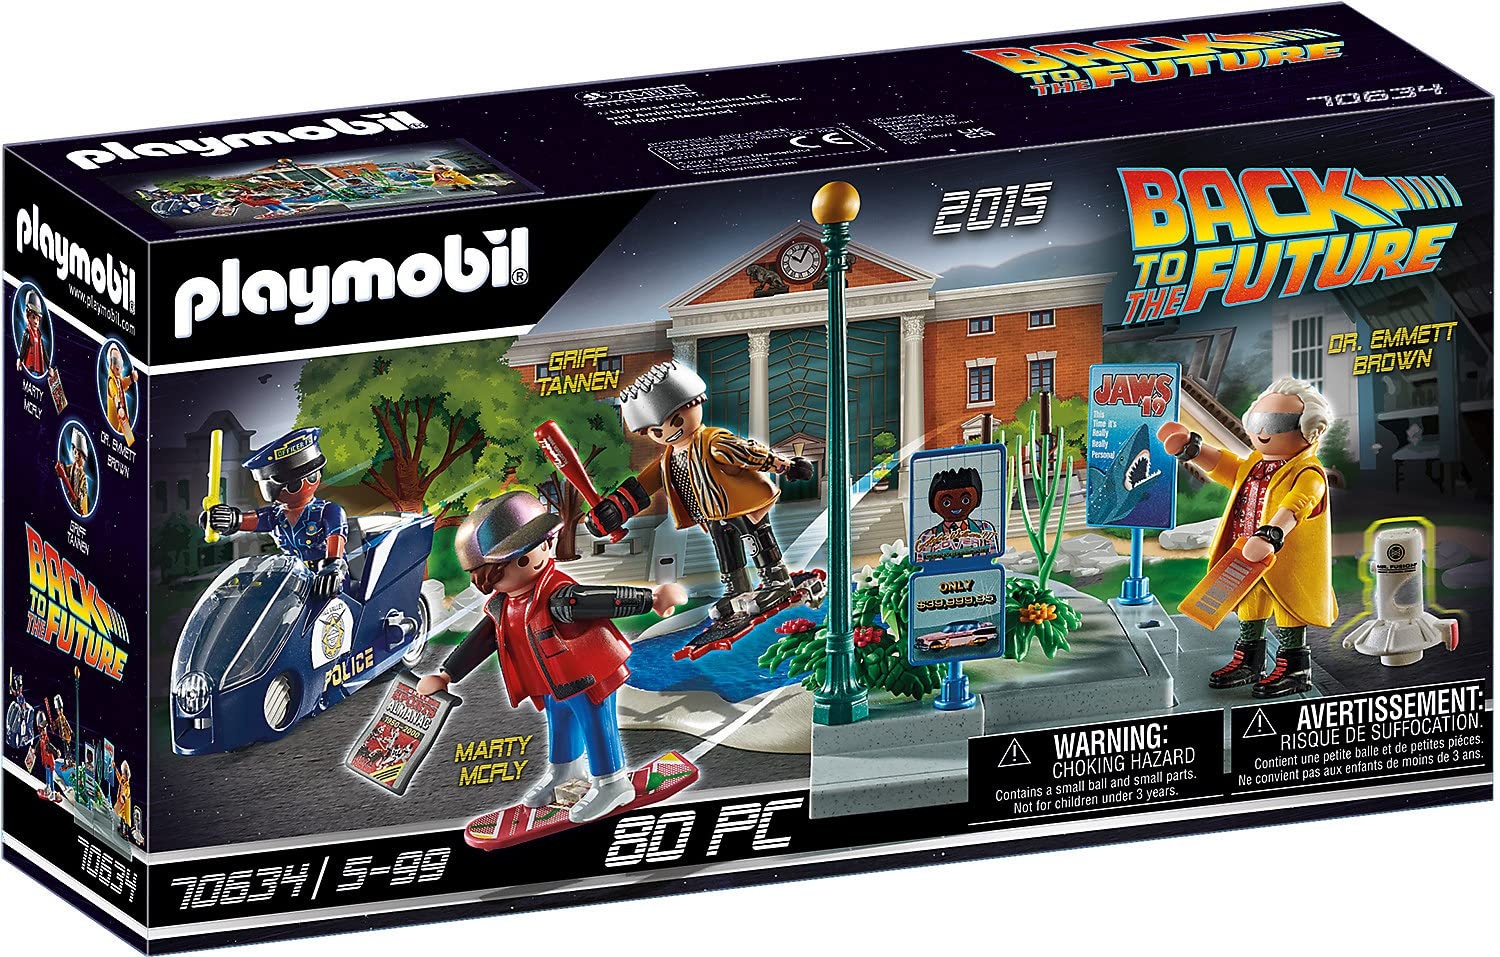 PLAYMOBIL Back to The Future 70634 Part II Verfolgung mit Hoverboard, Ab 5 Jahren